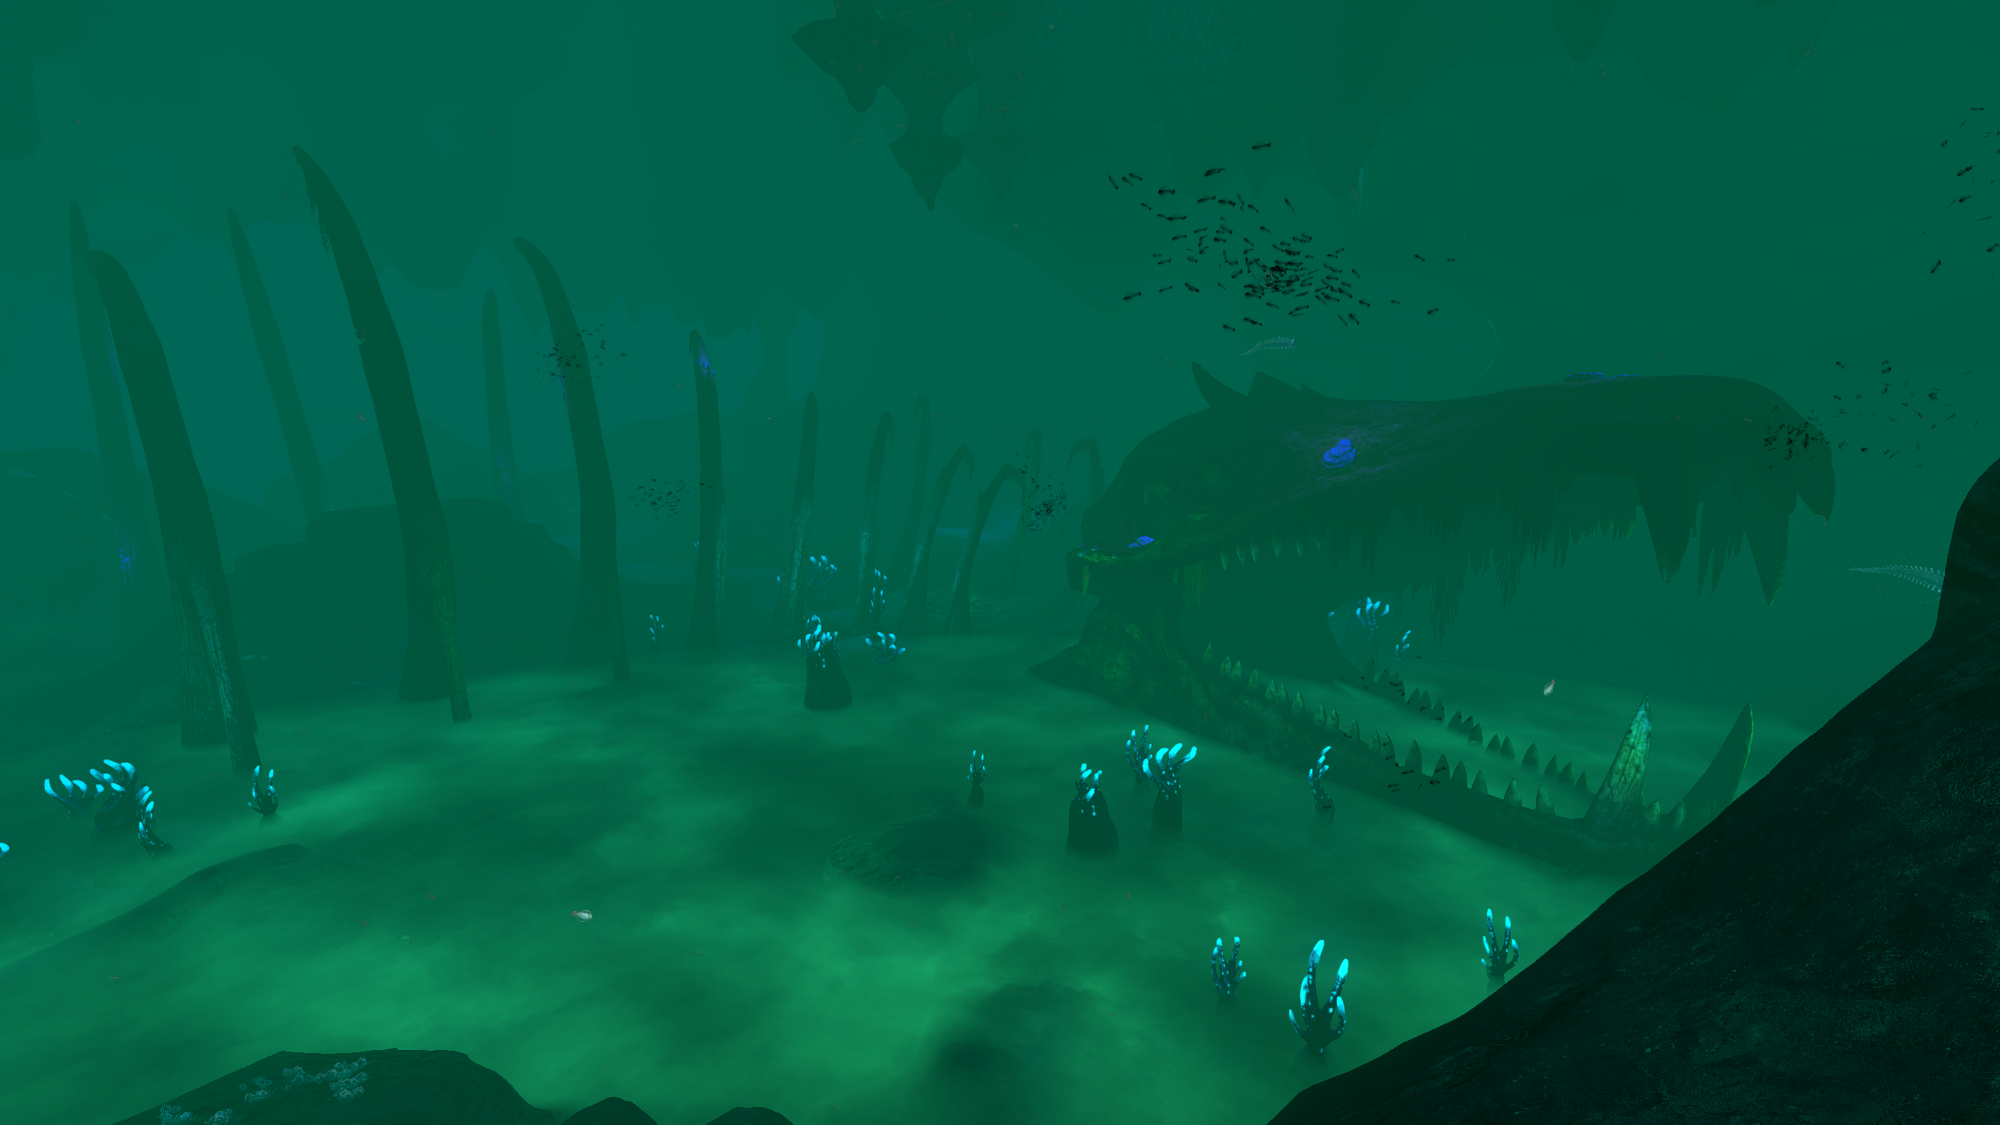 Gallery of Disease Research Facility Subnautica.